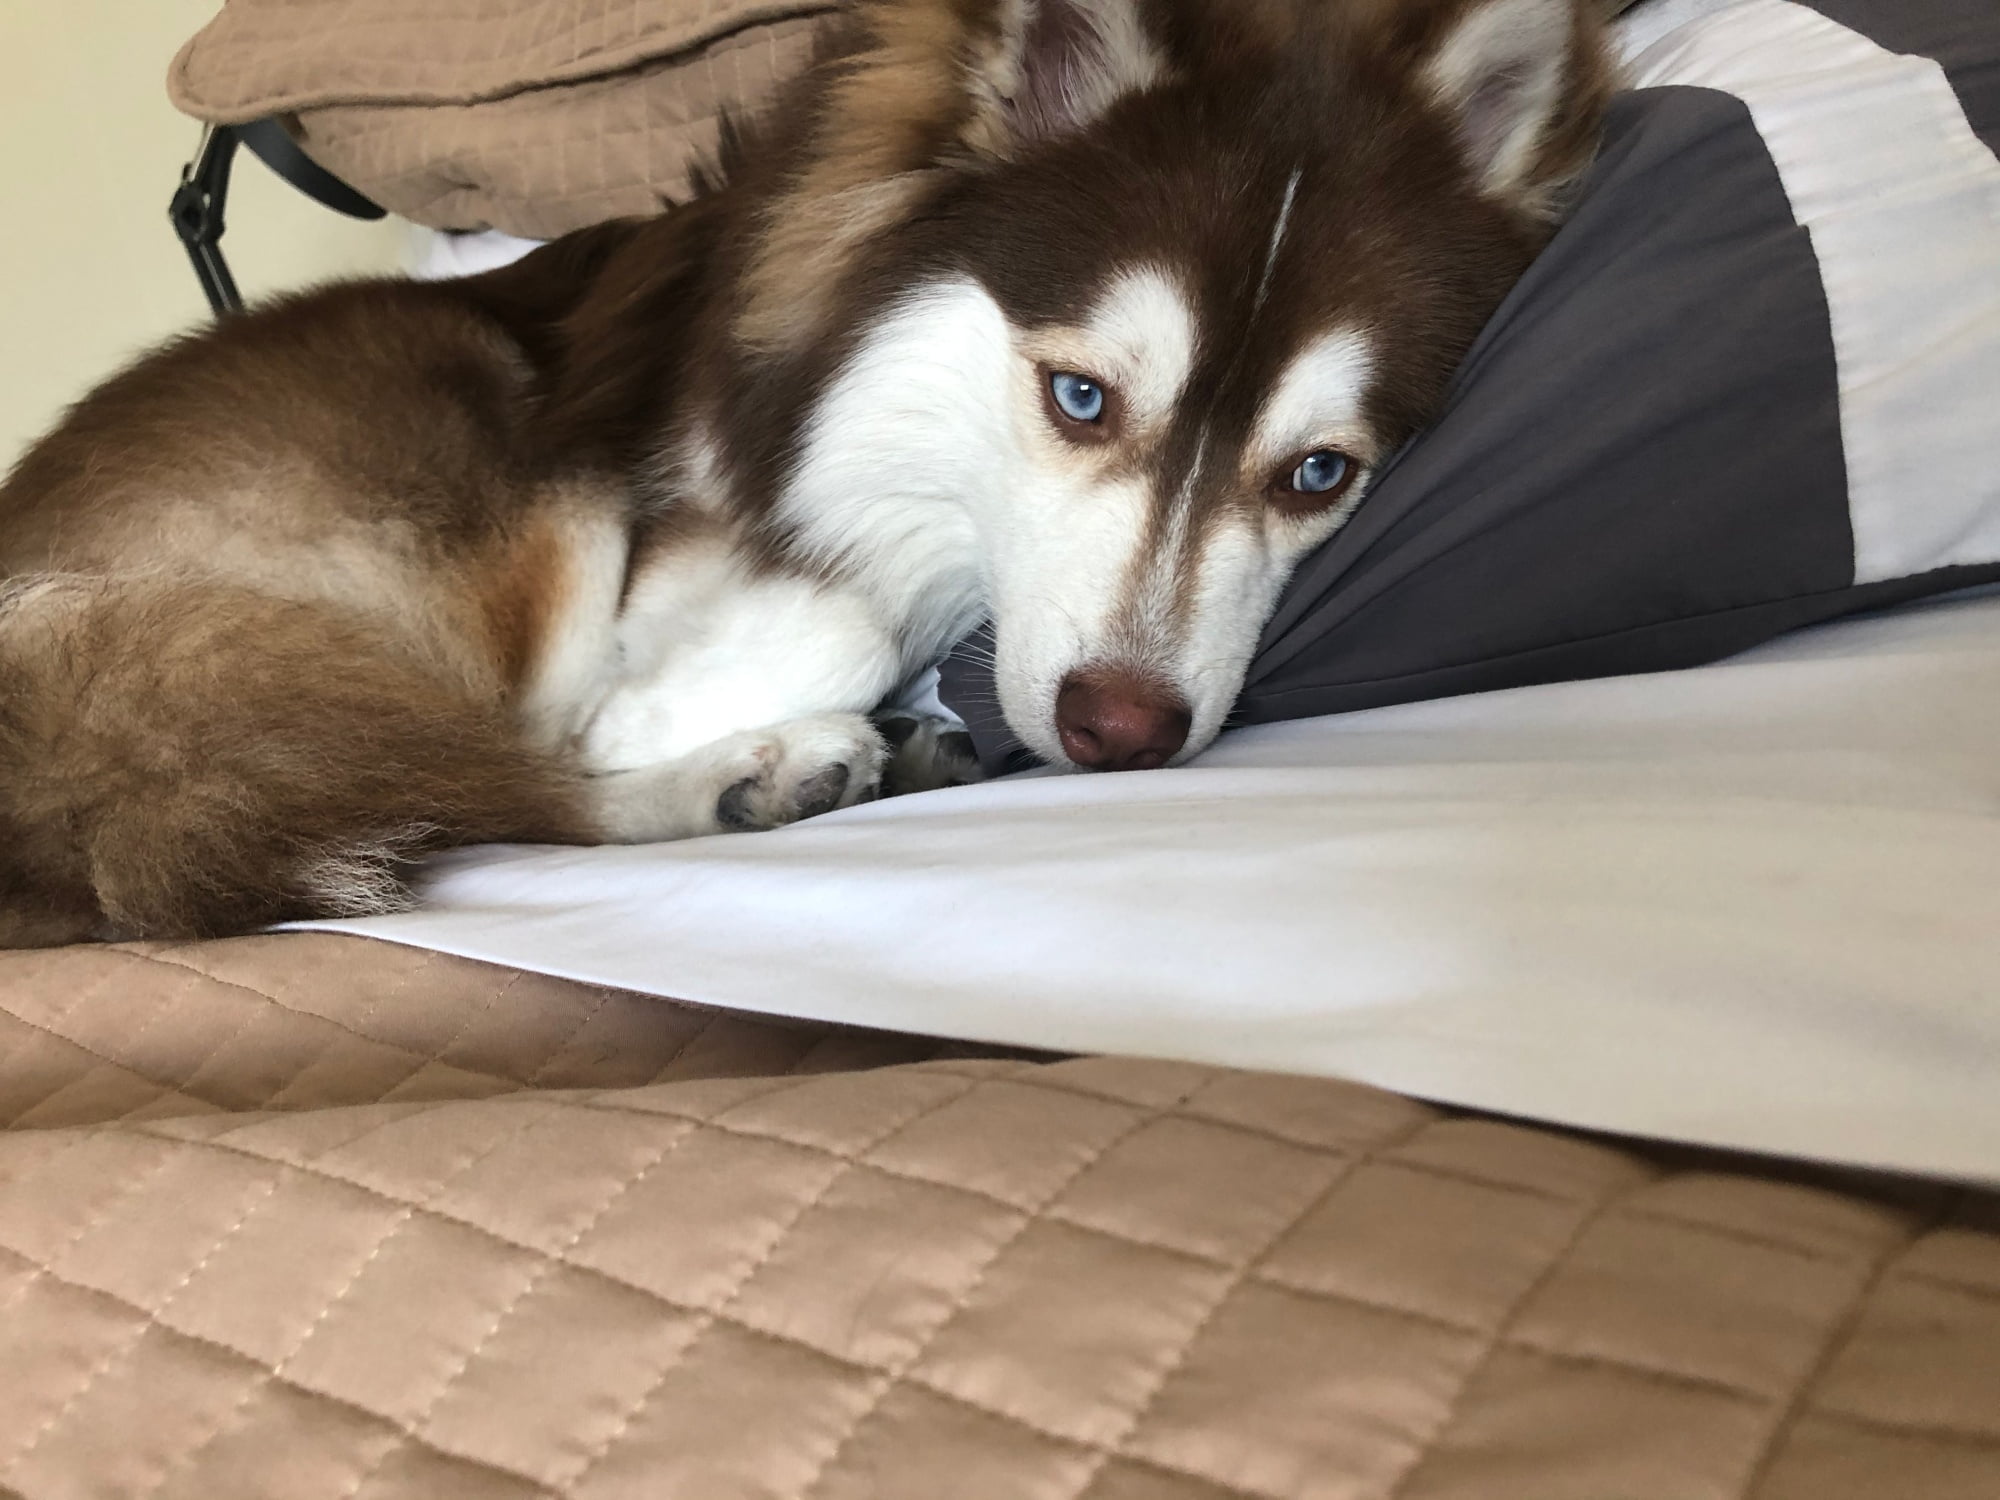 Pomsky health issues and concerns